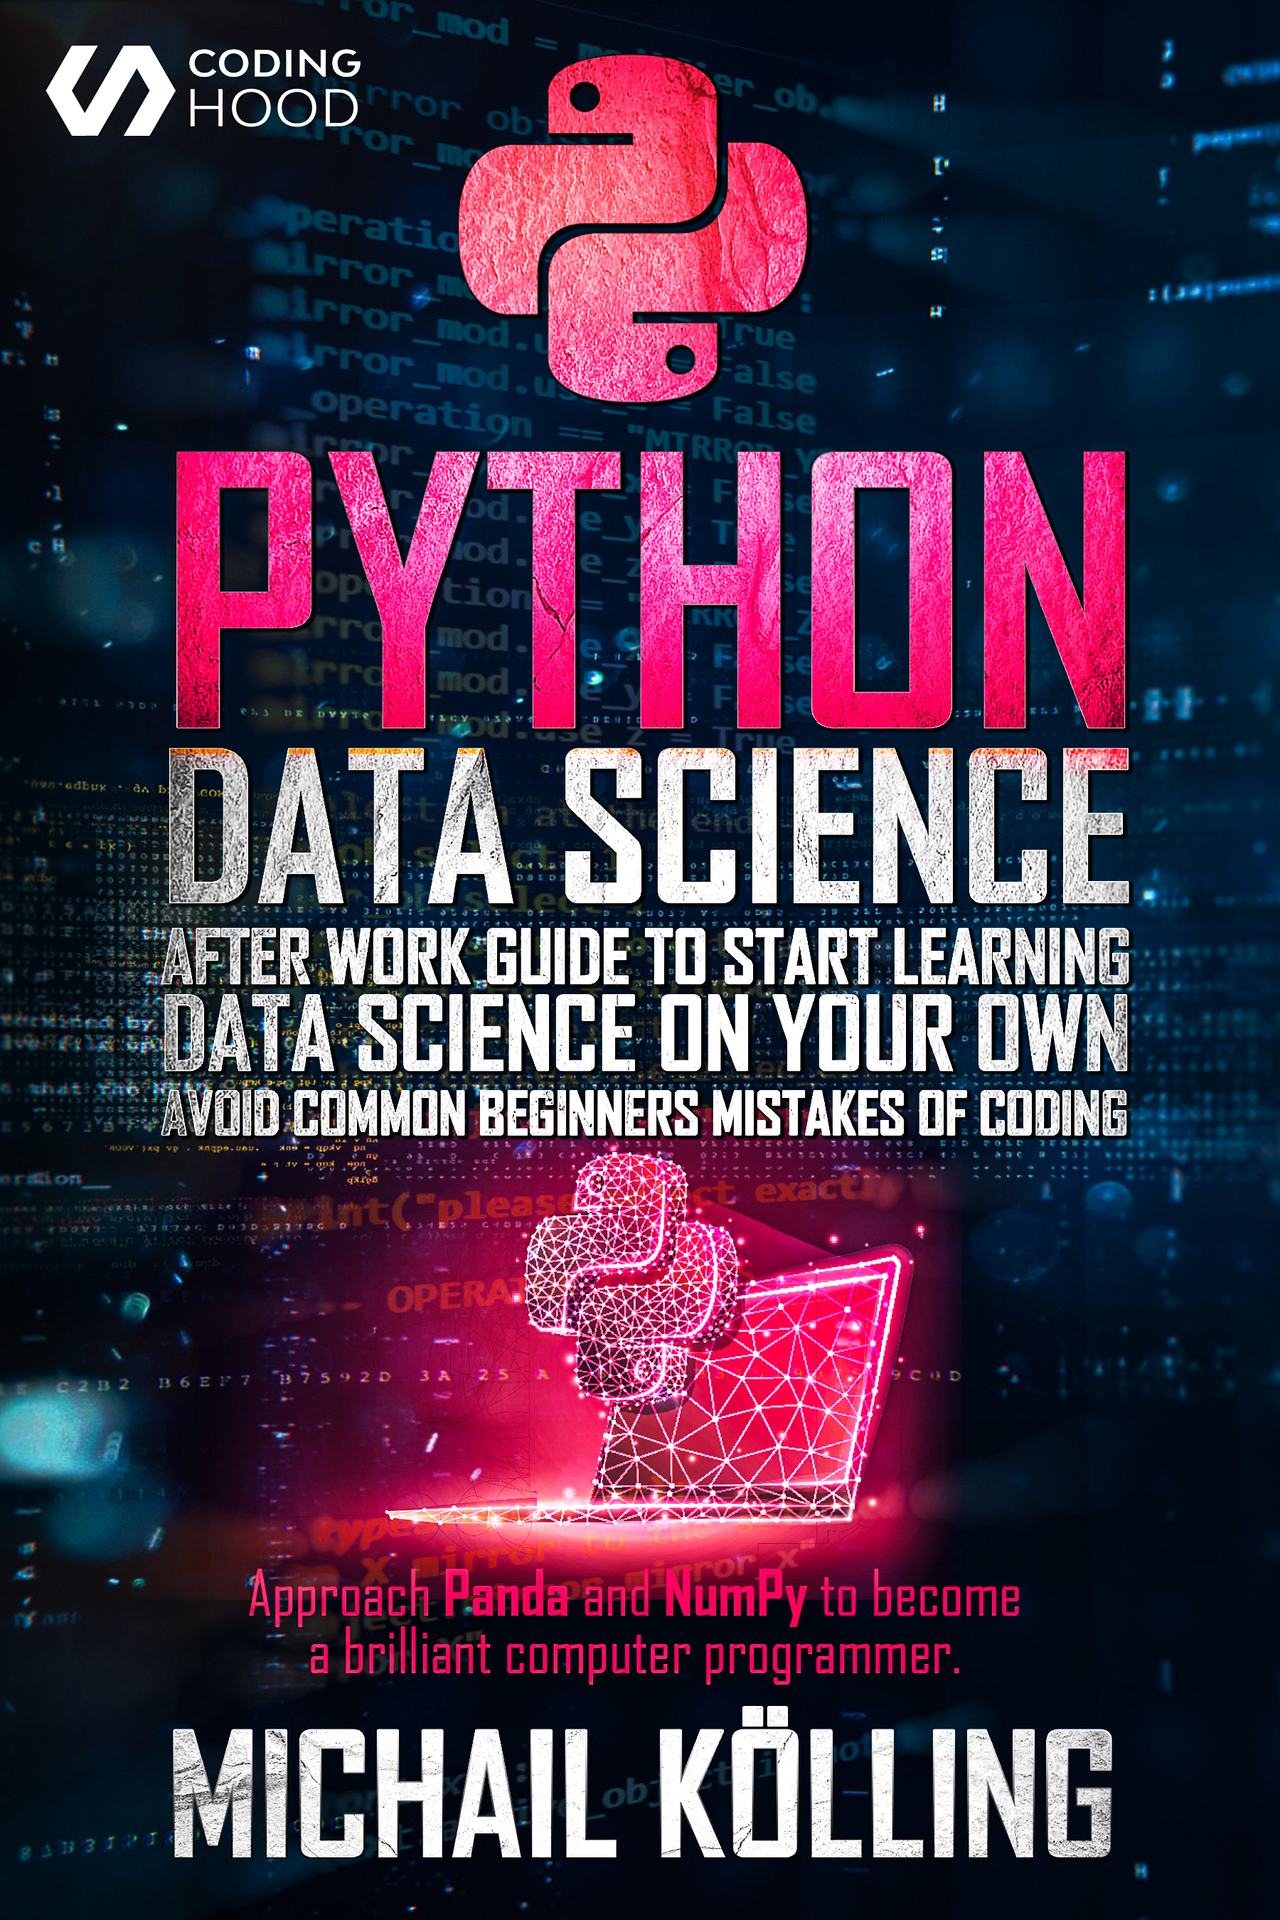 Python Data Science: After work guide to start learning Data Science on your own. Avoid common beginners mistakes of coding. Approach Panda and NumPy to become a brilliant computer programmer.